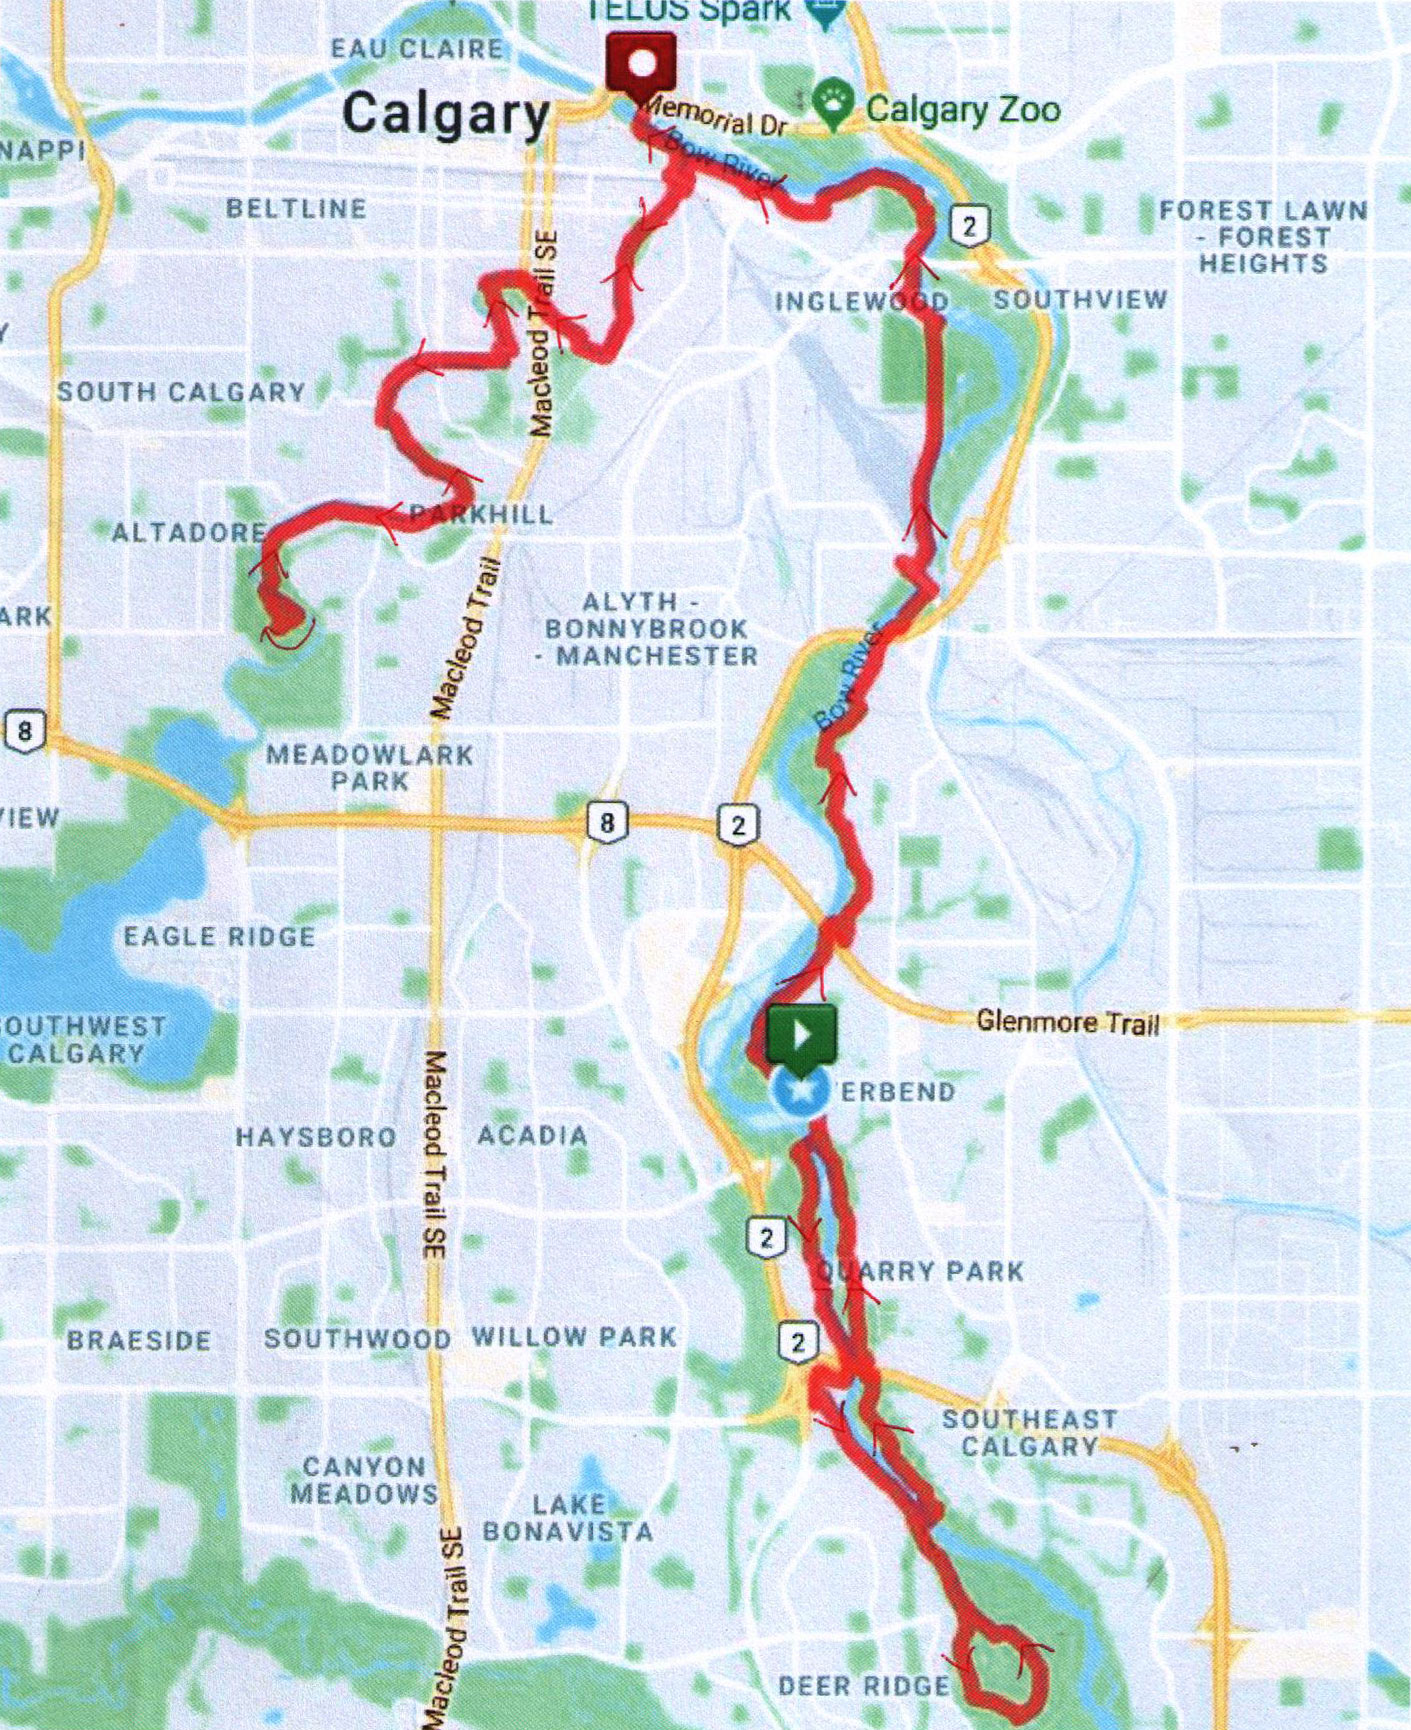 61K Urban Ultra & Relay route map